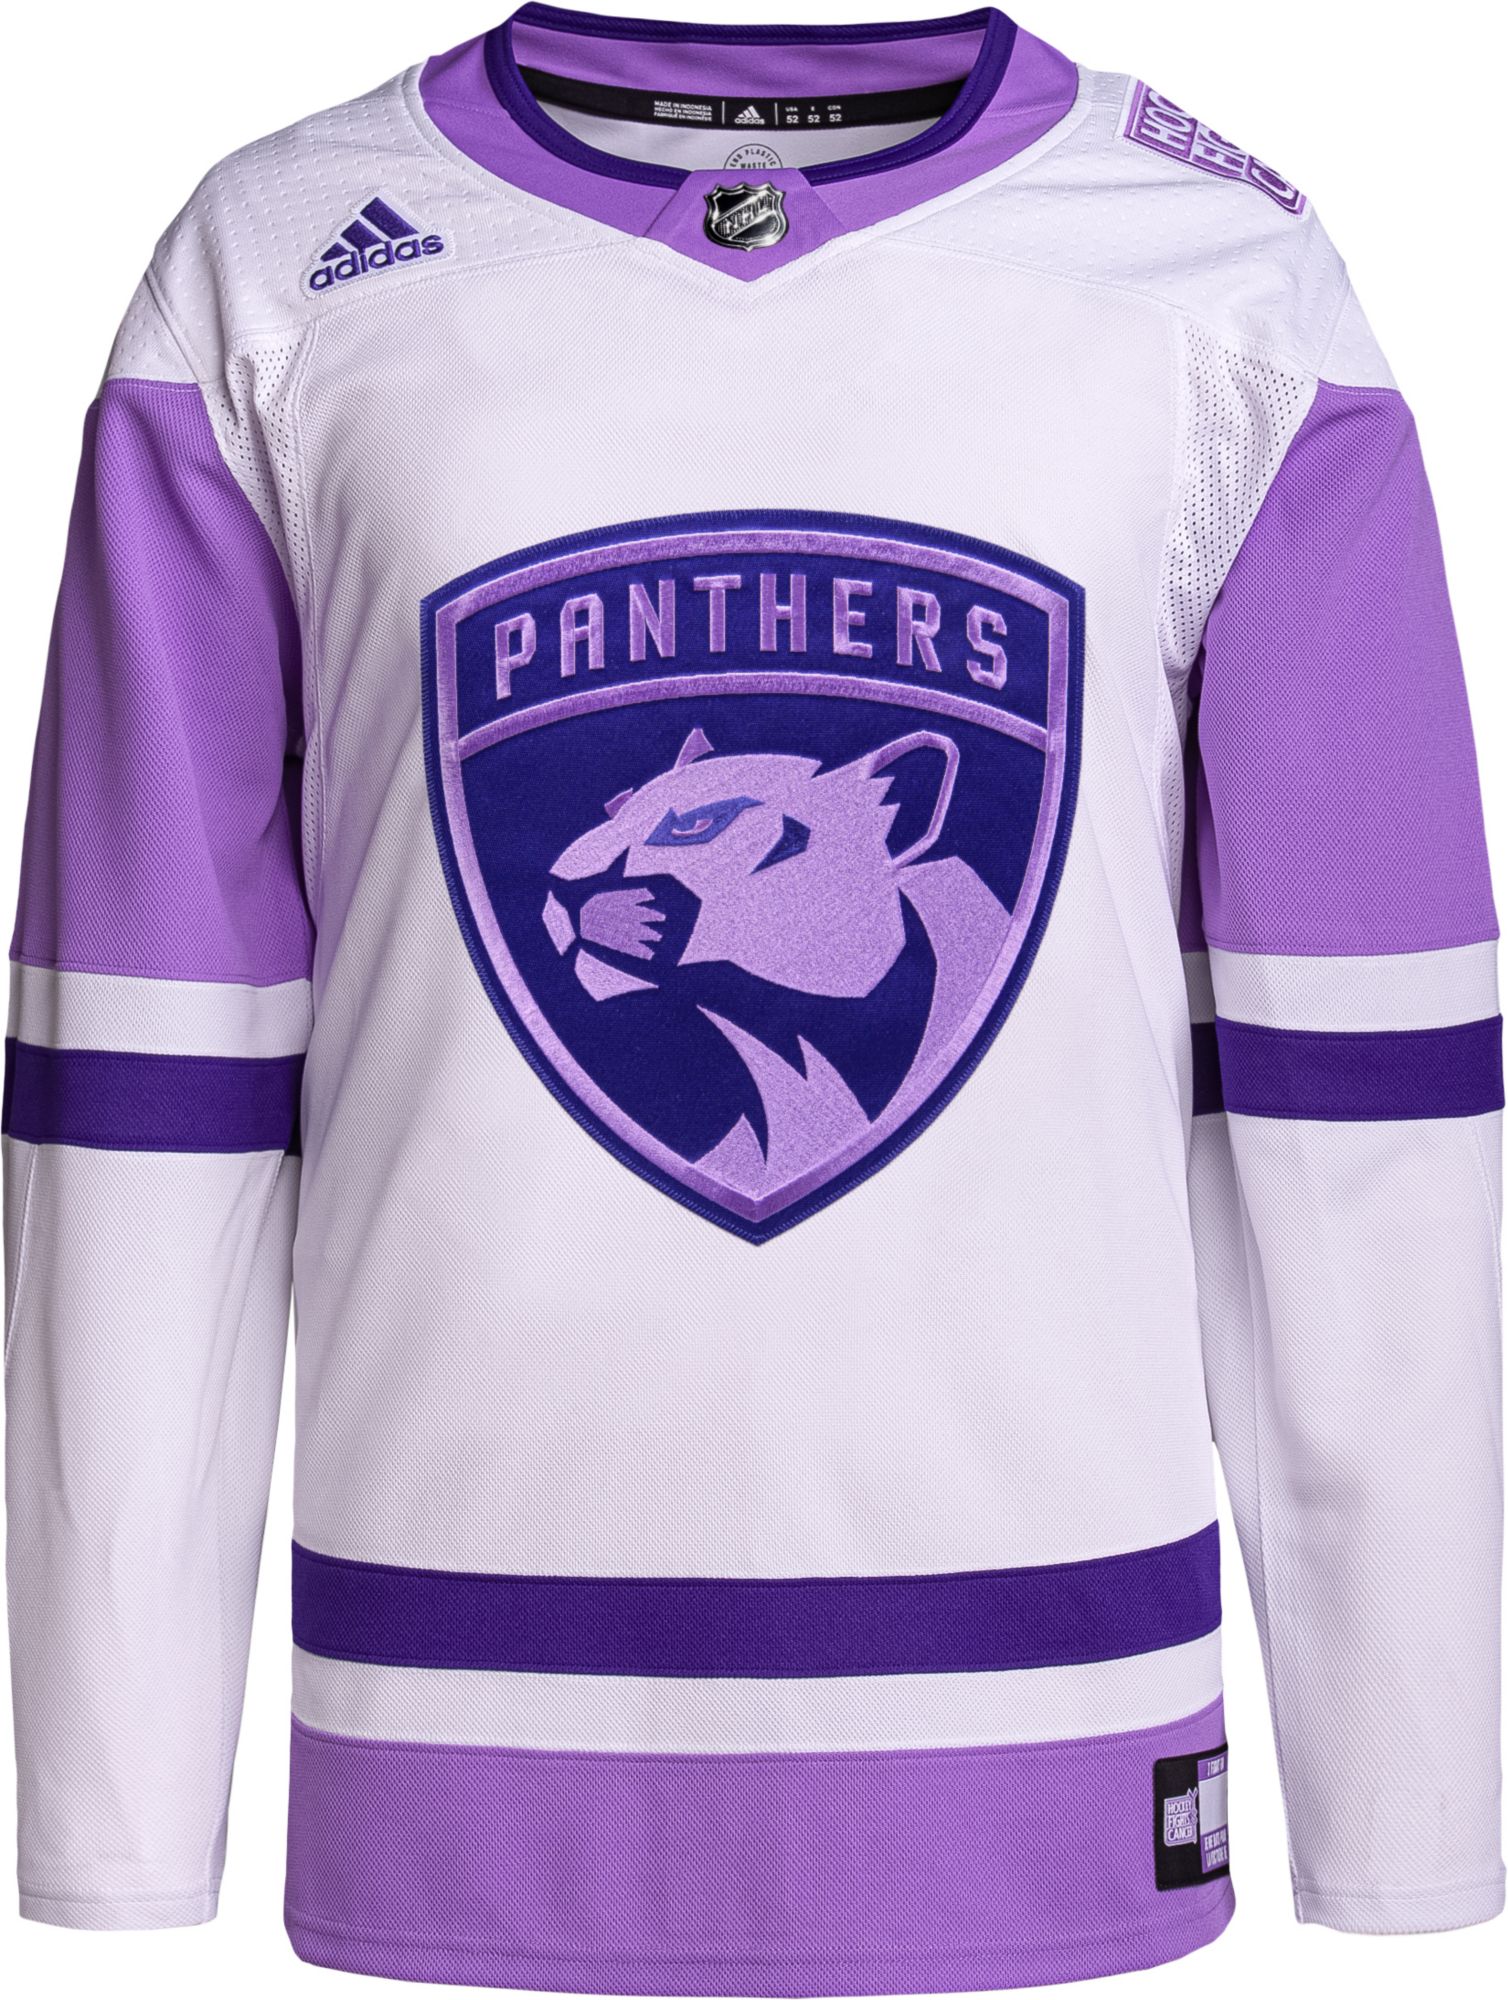 Florida Panthers All-Star jersey